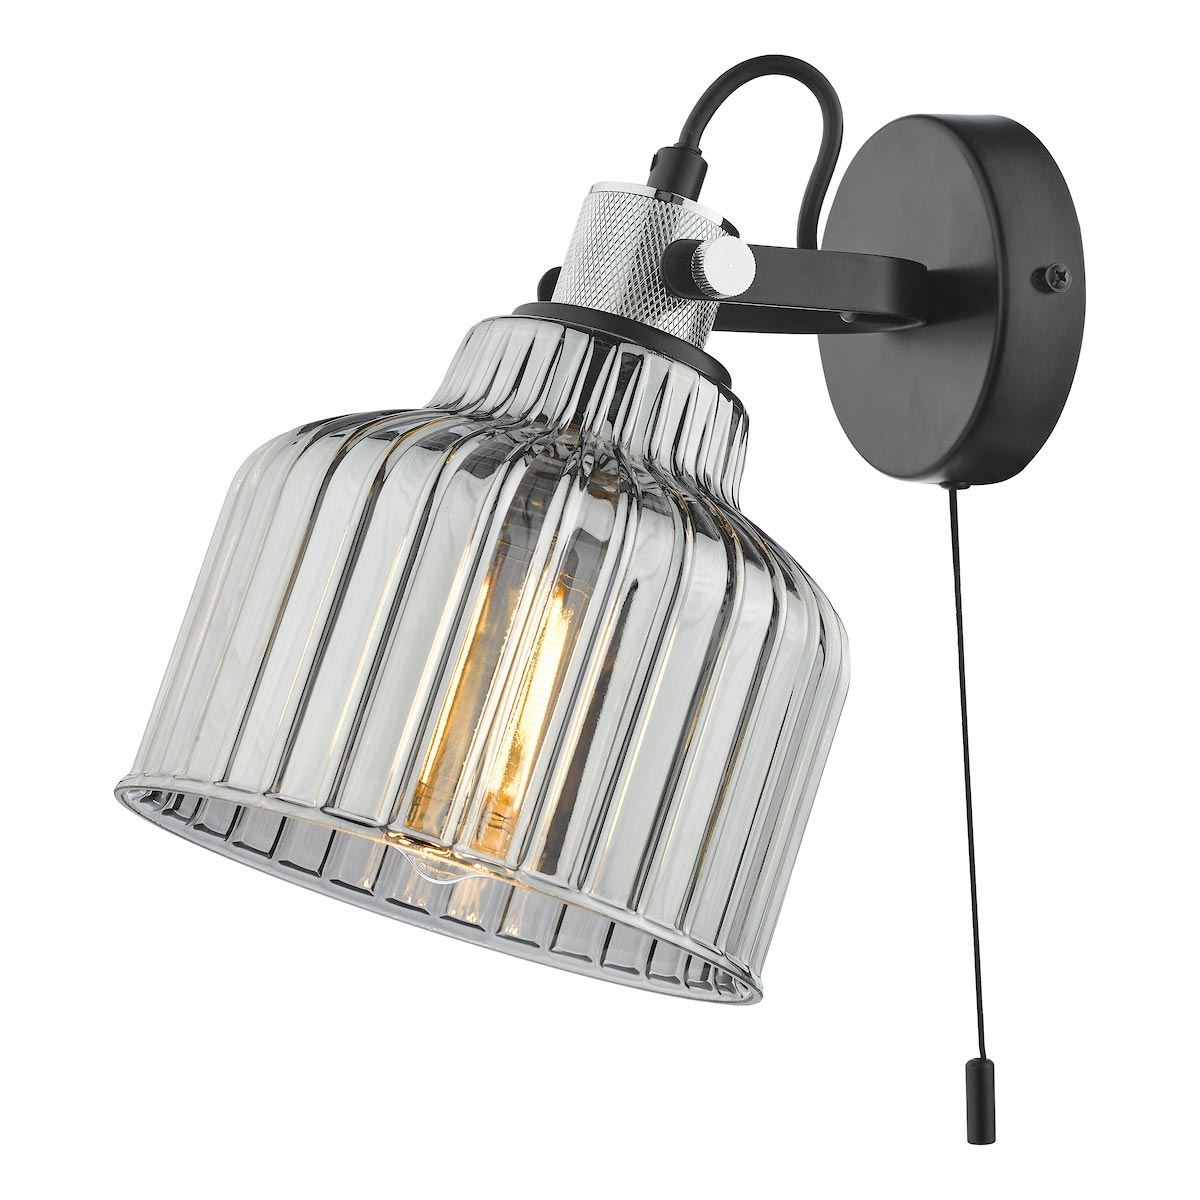 Dar Rhode Chrome Industrial 1 Light Switched Wall Lamp Smoked Glass